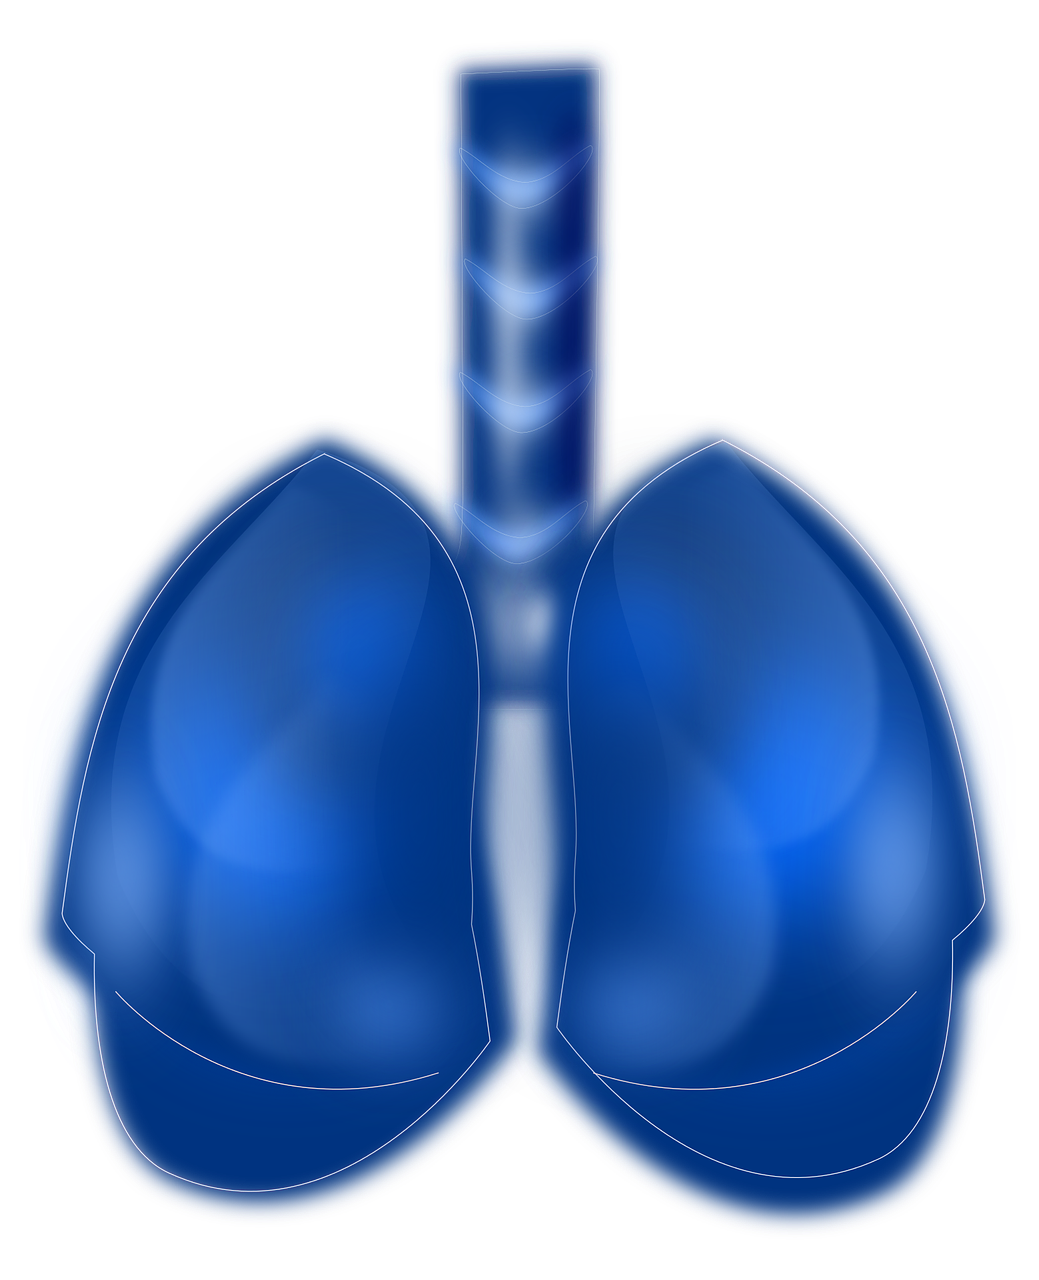 blue human lungs free photo